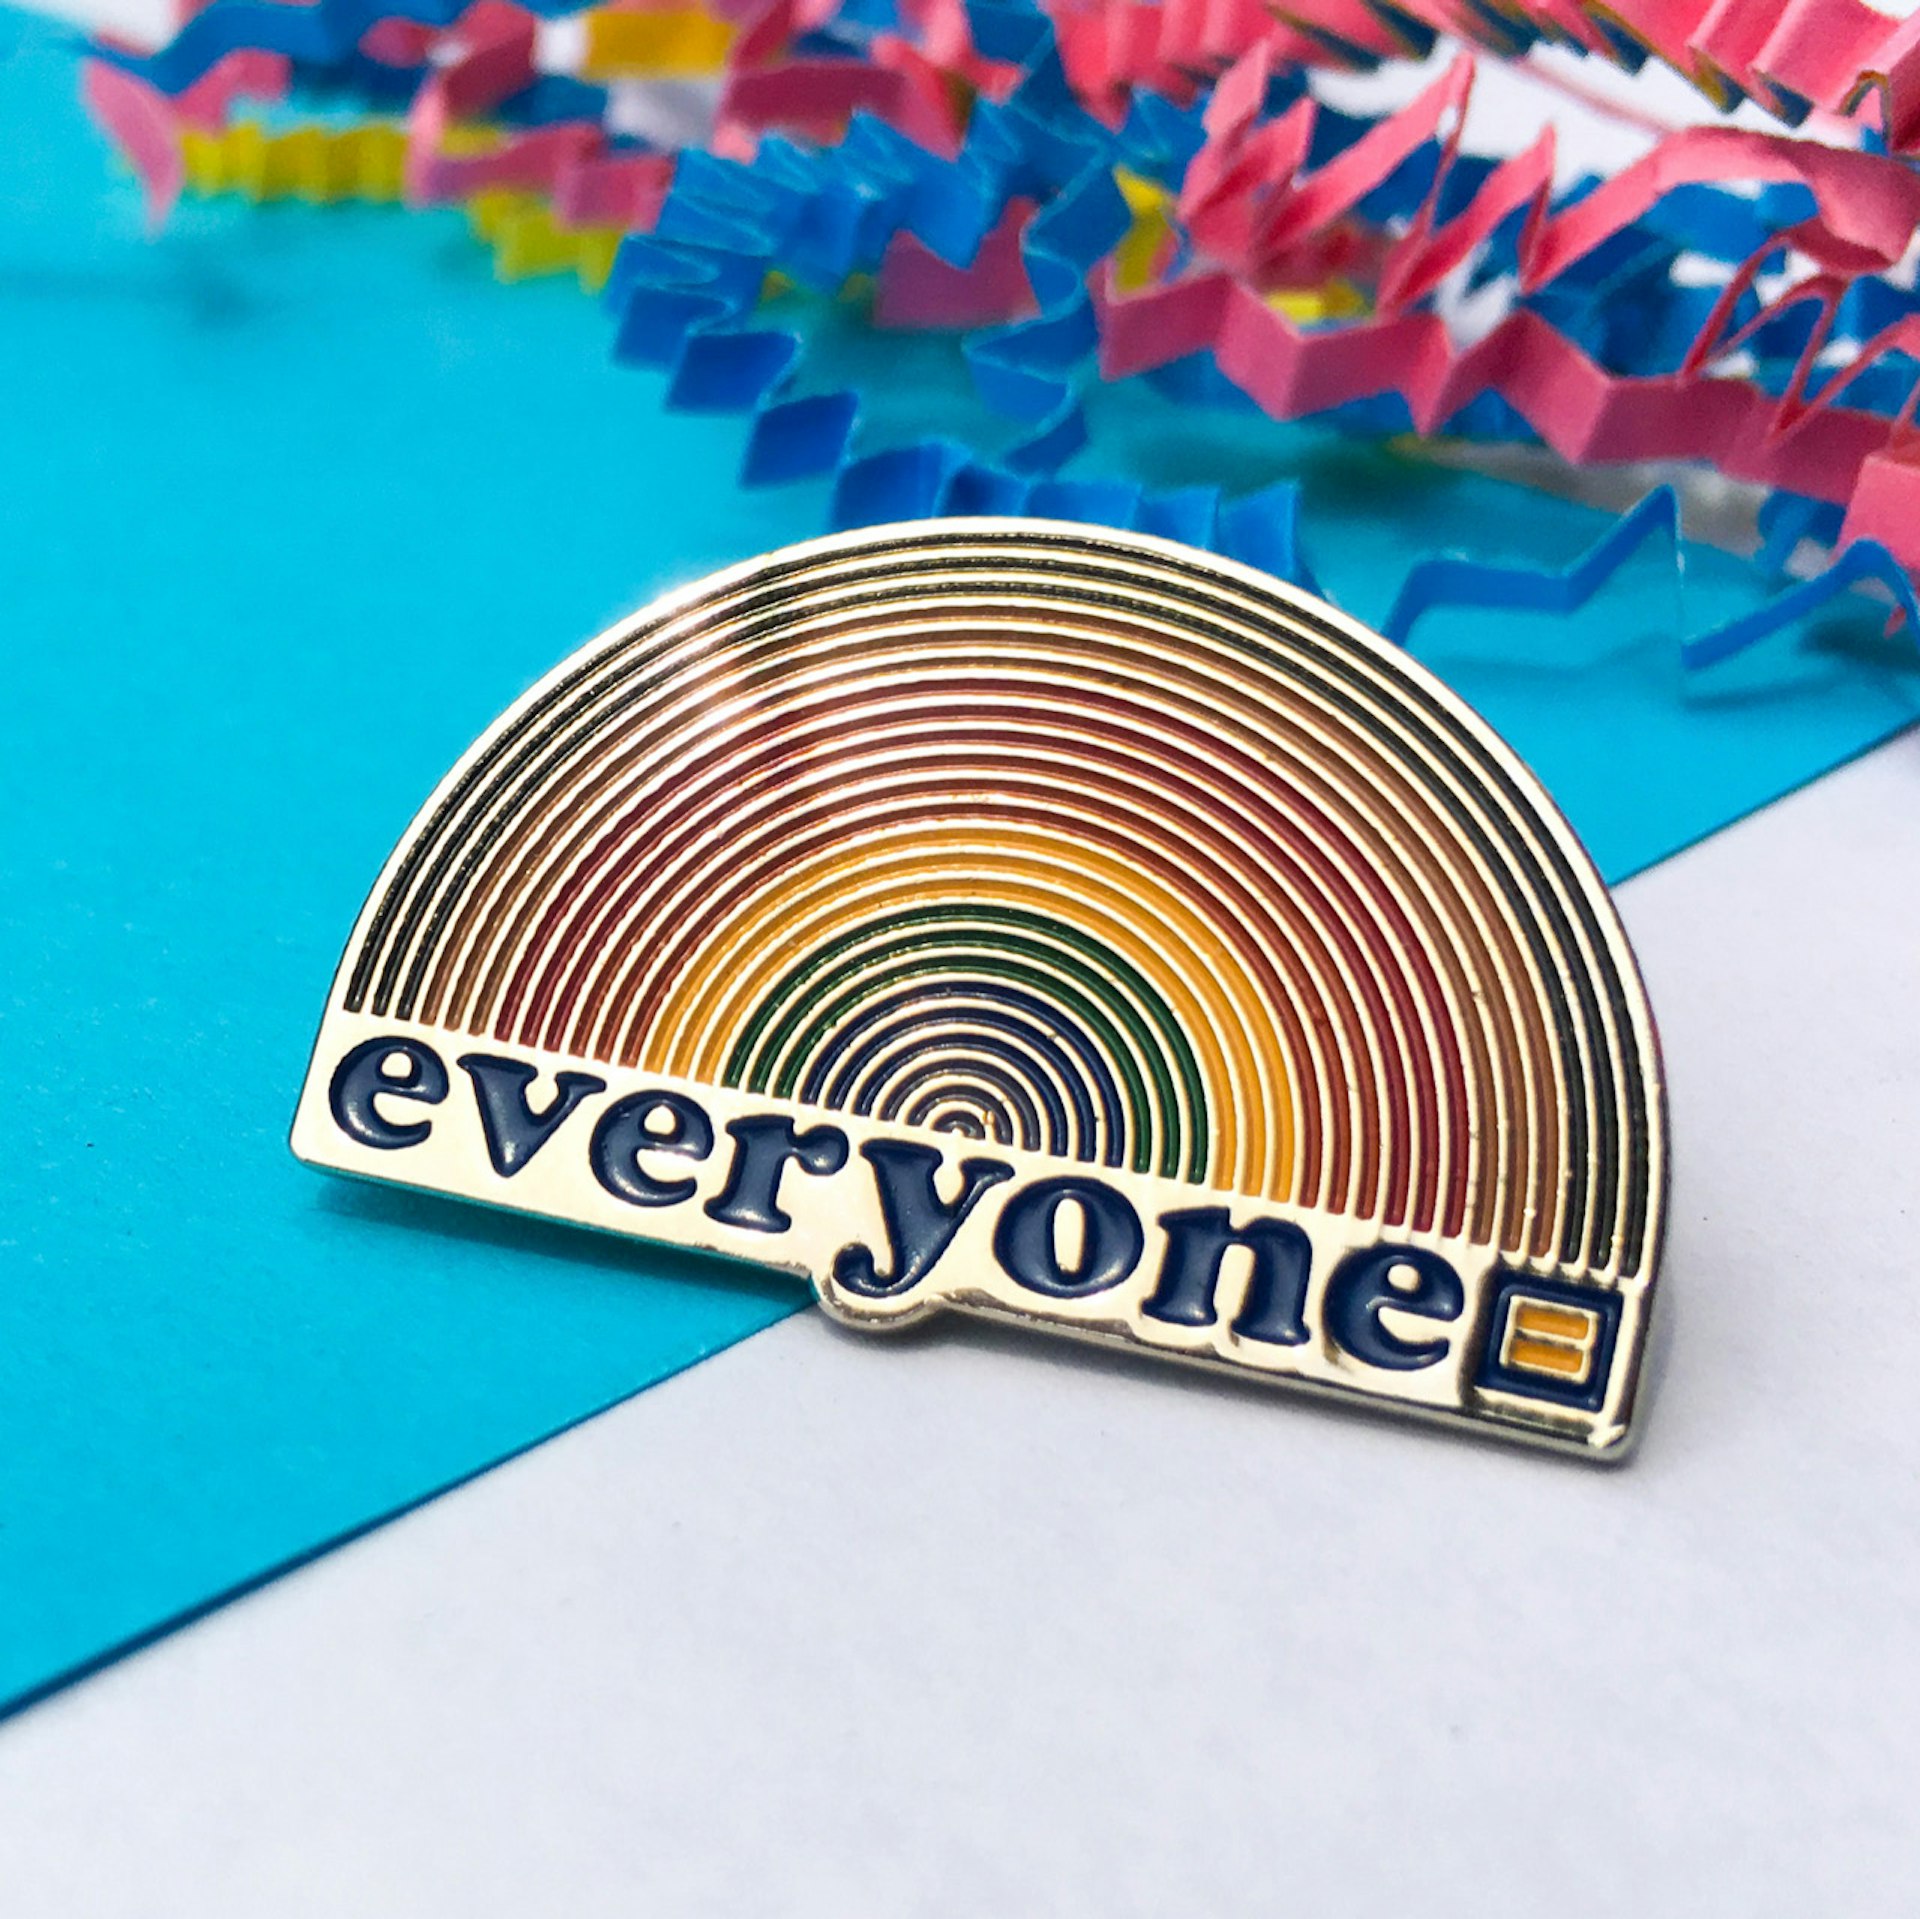 Show your support for LGBTQ equality with the Human Rights Campaign's rainbow pin.